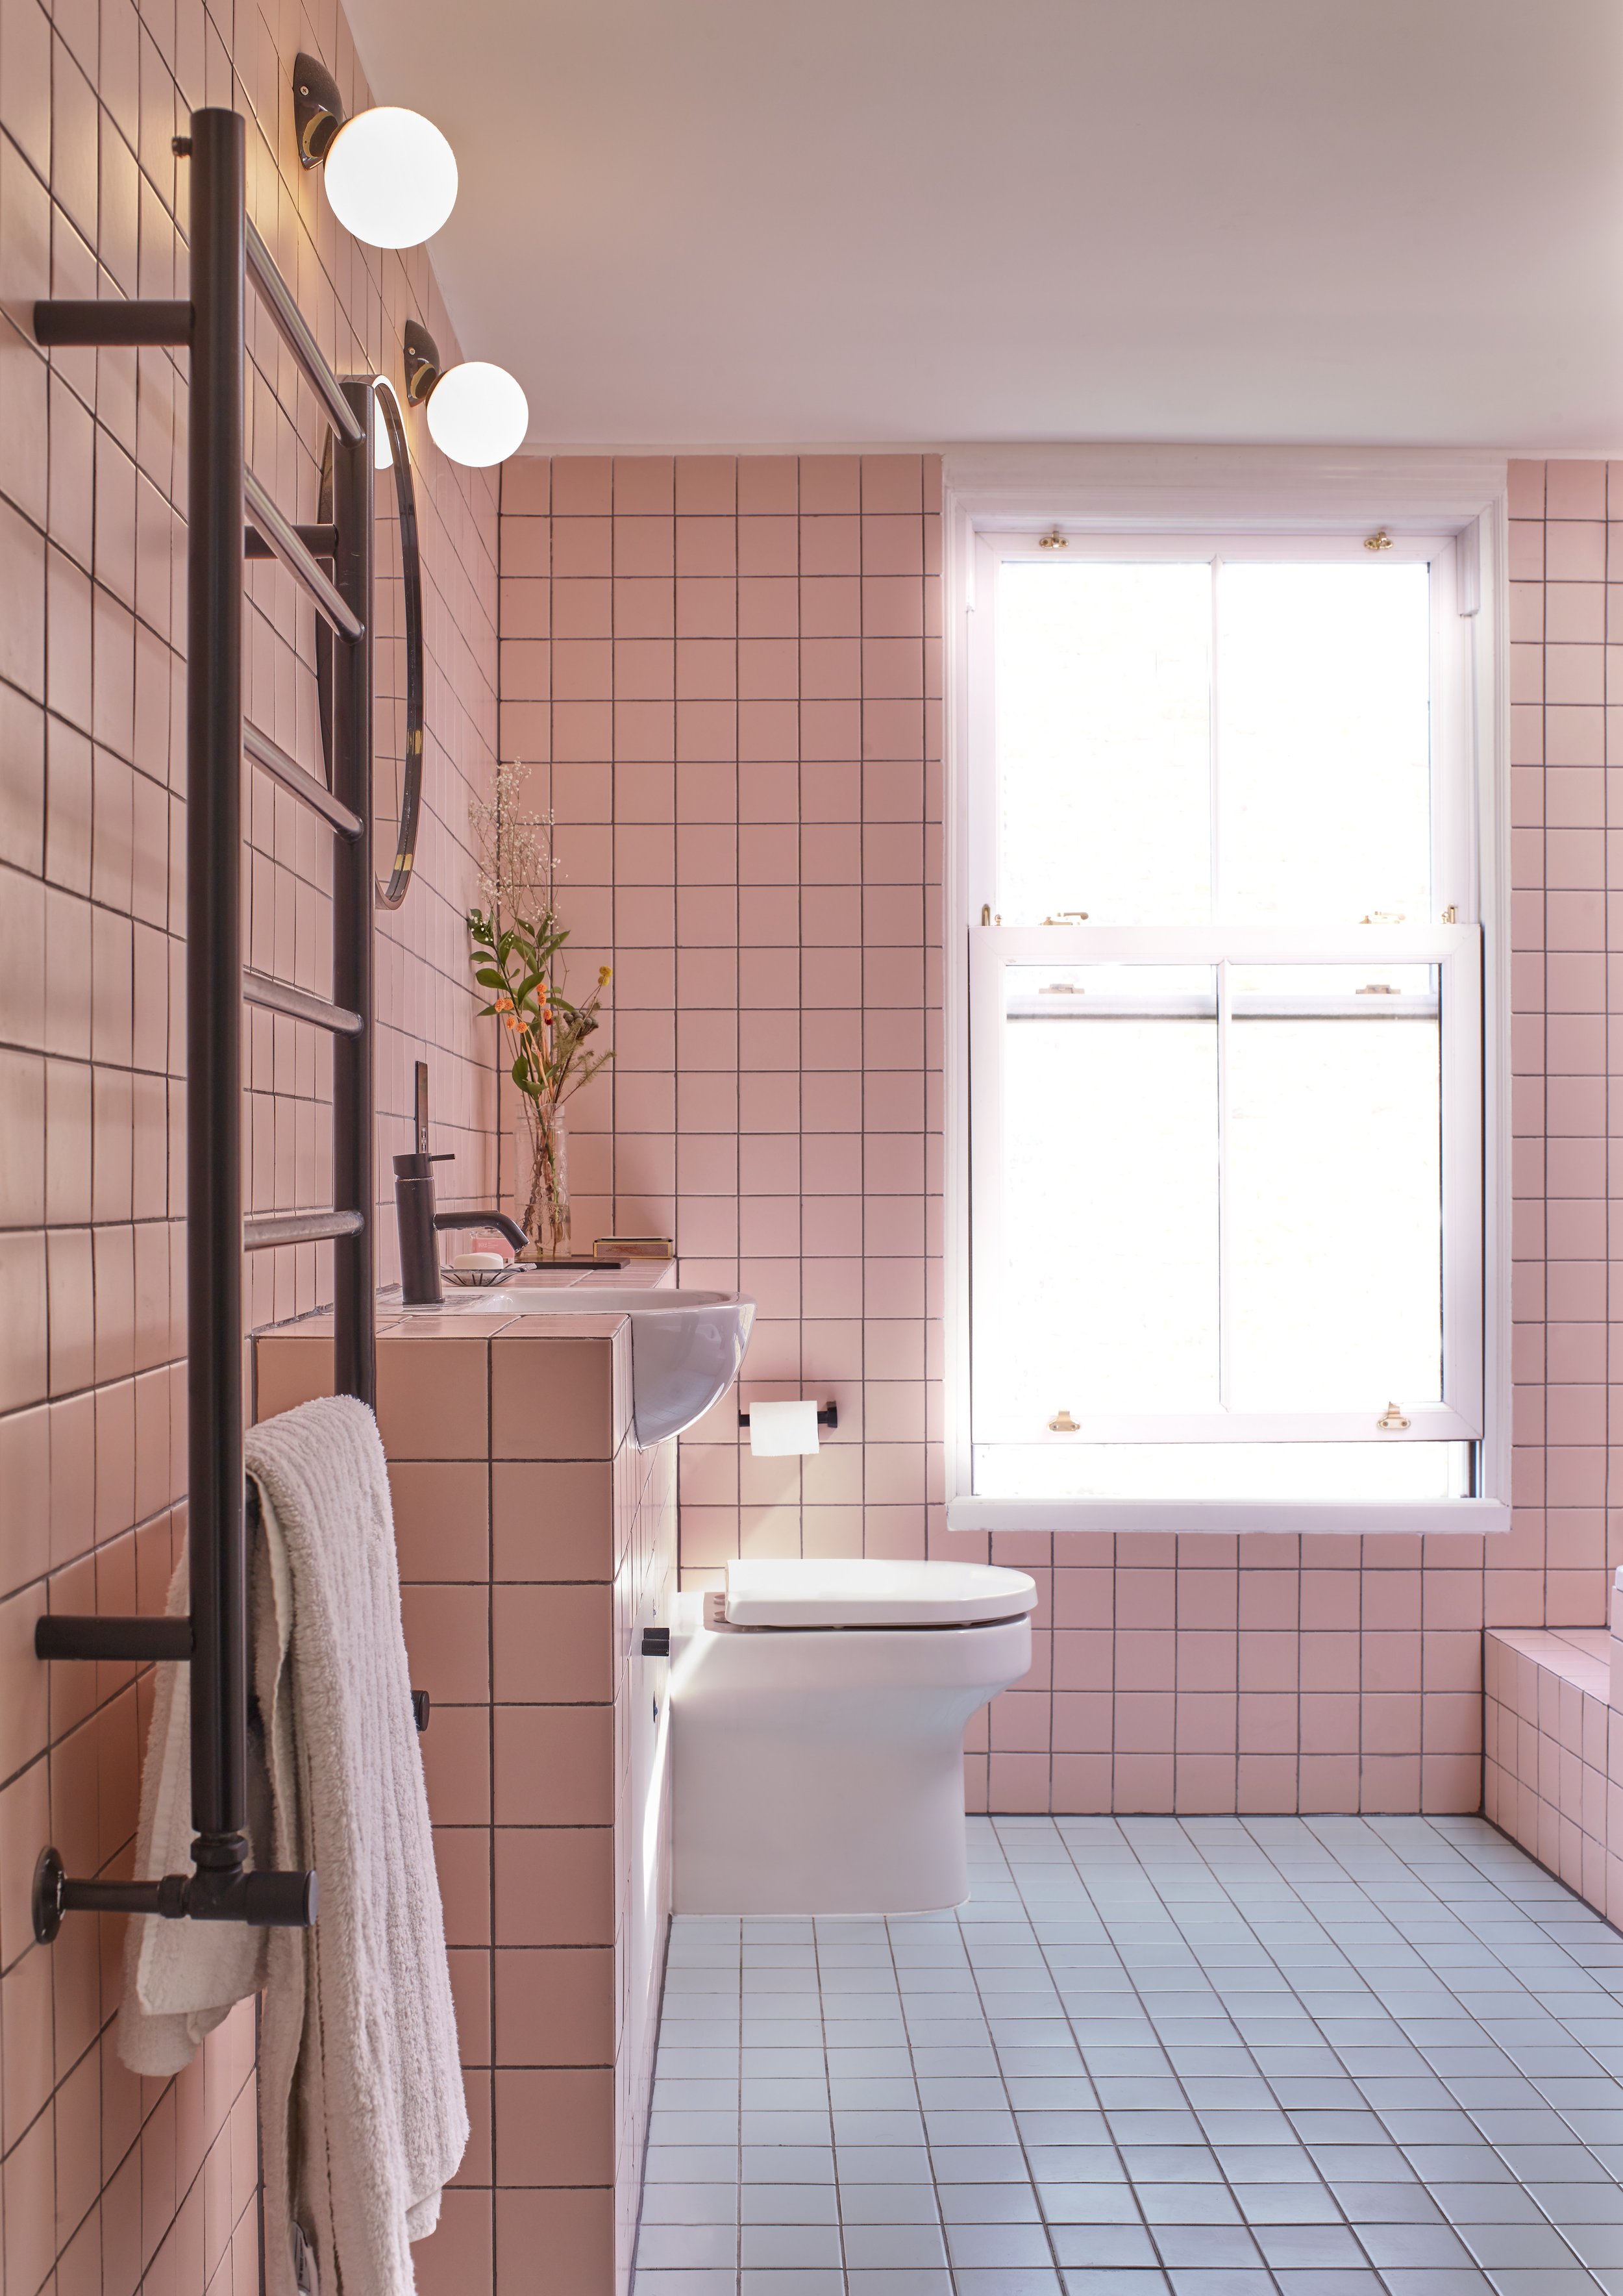 Bathroom with pink wall tiles and green floor tiles,